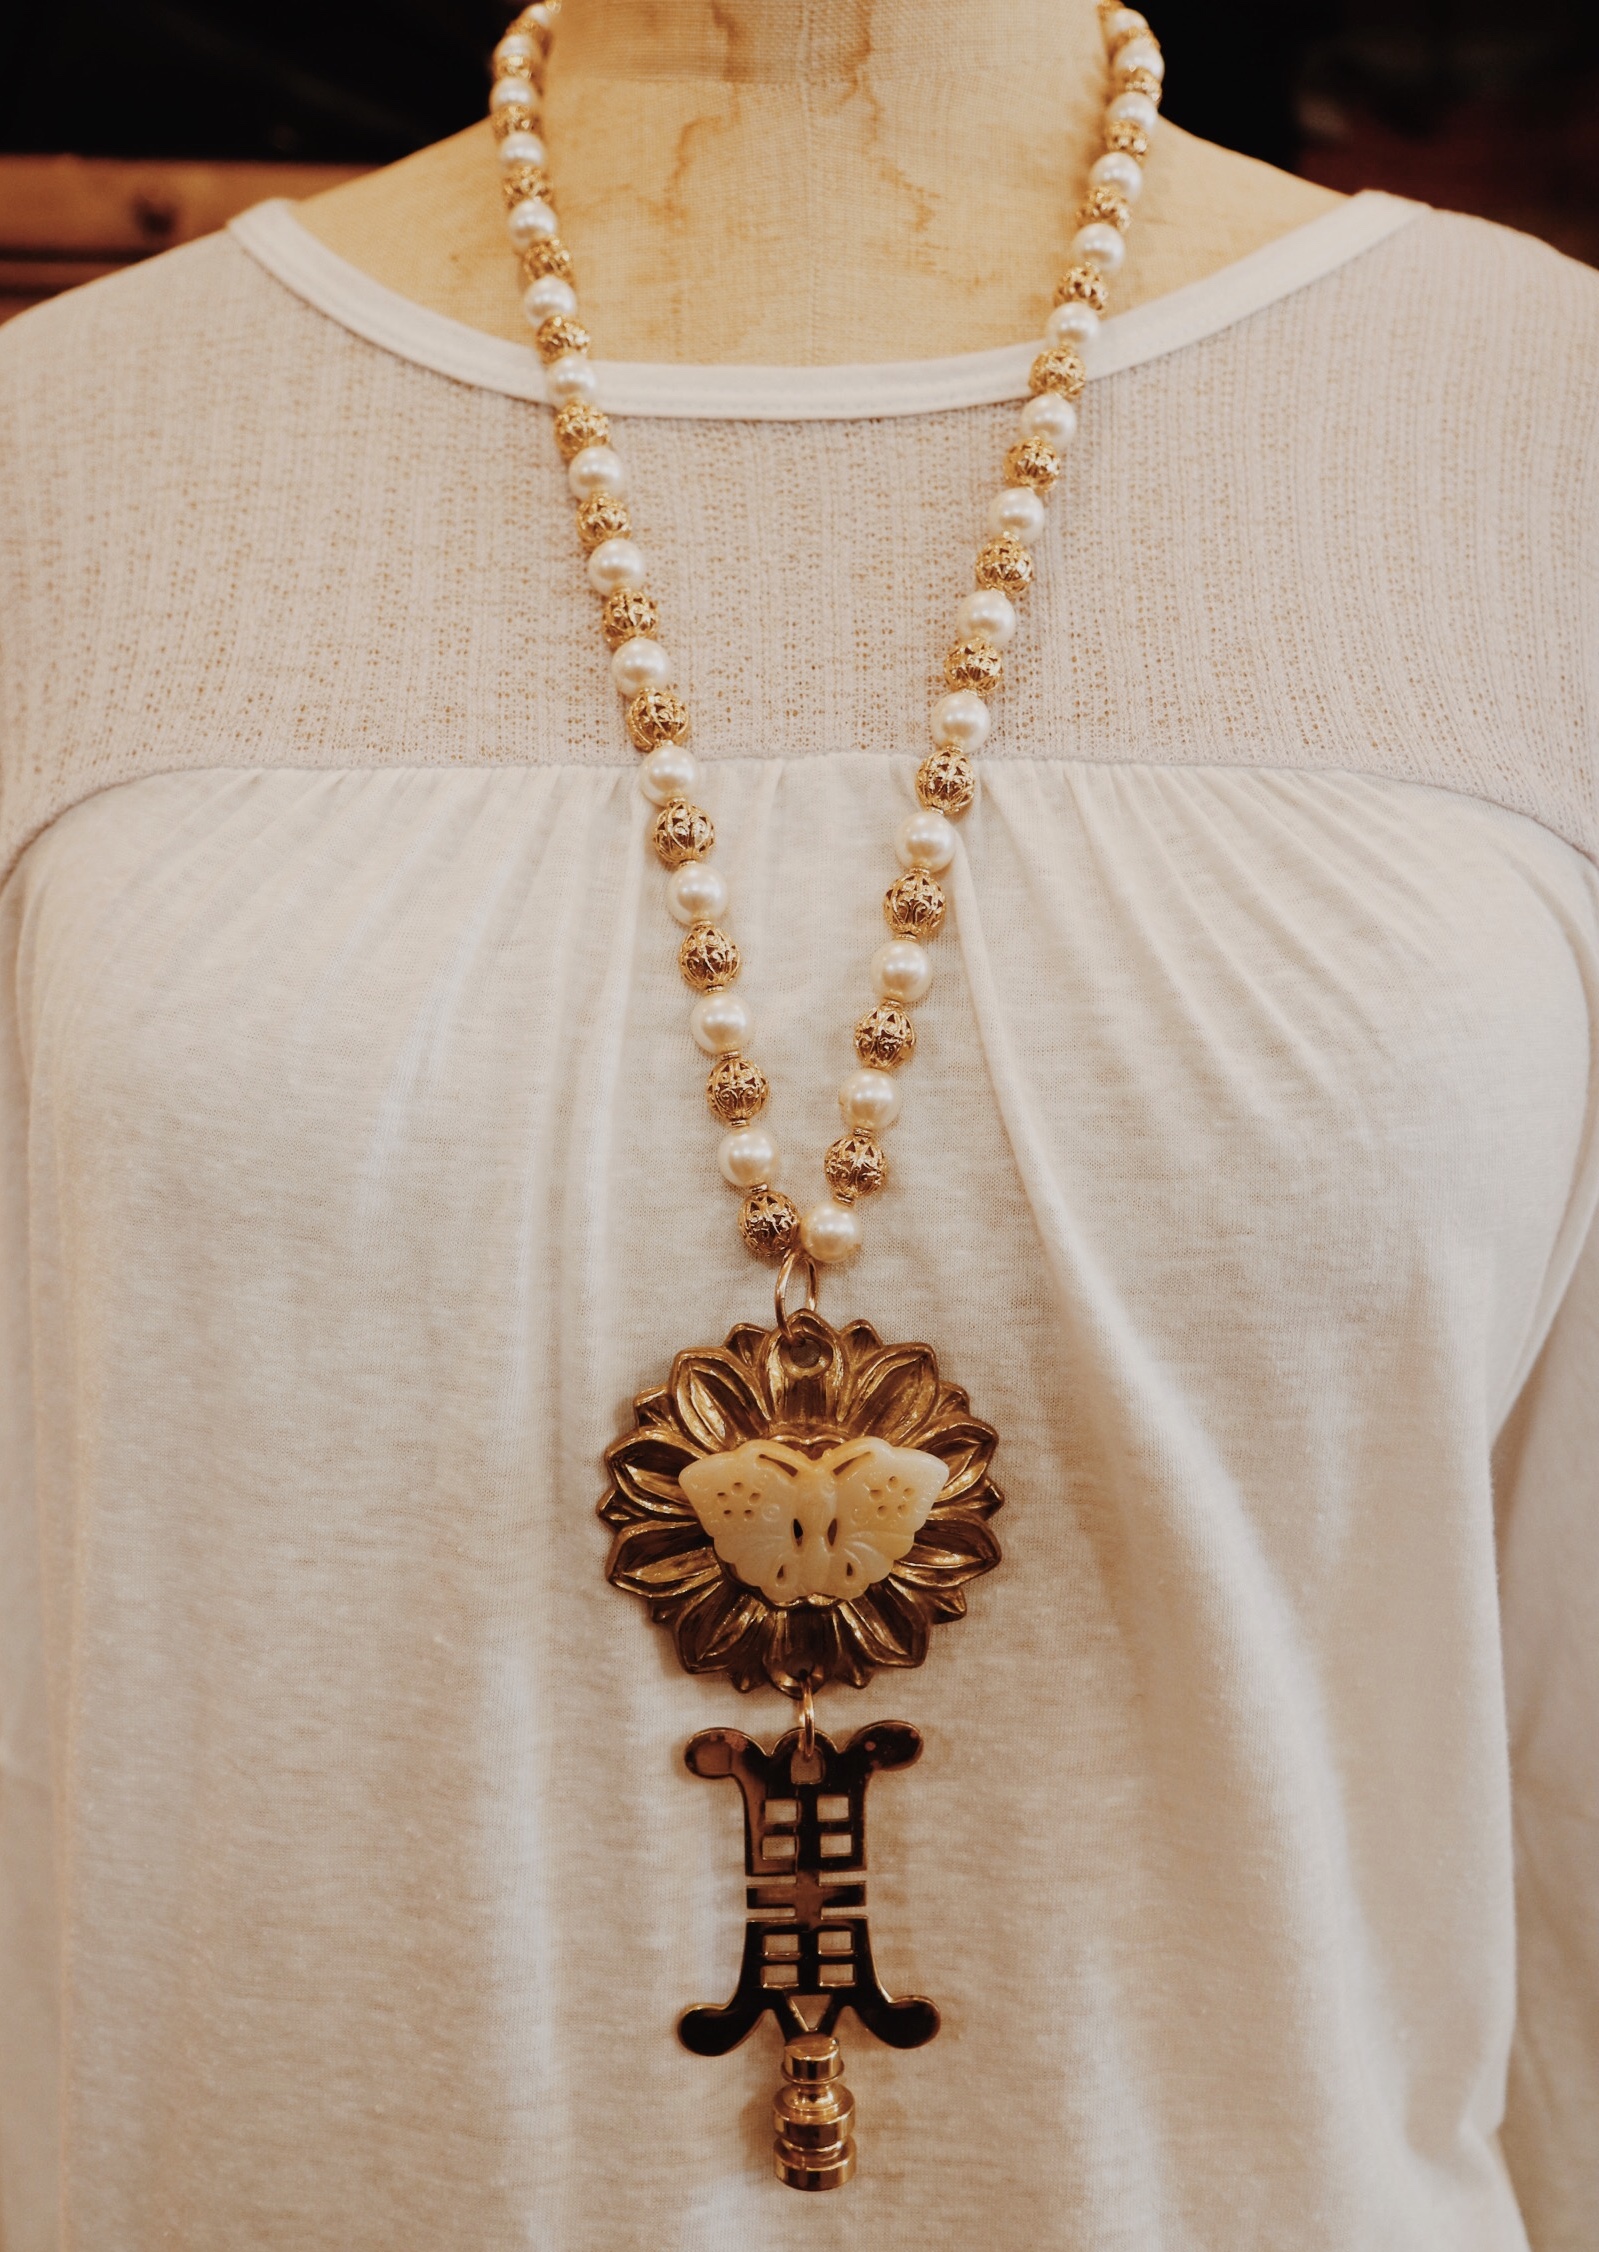 This chunky, handmade necklace is on a 30 inch chain!